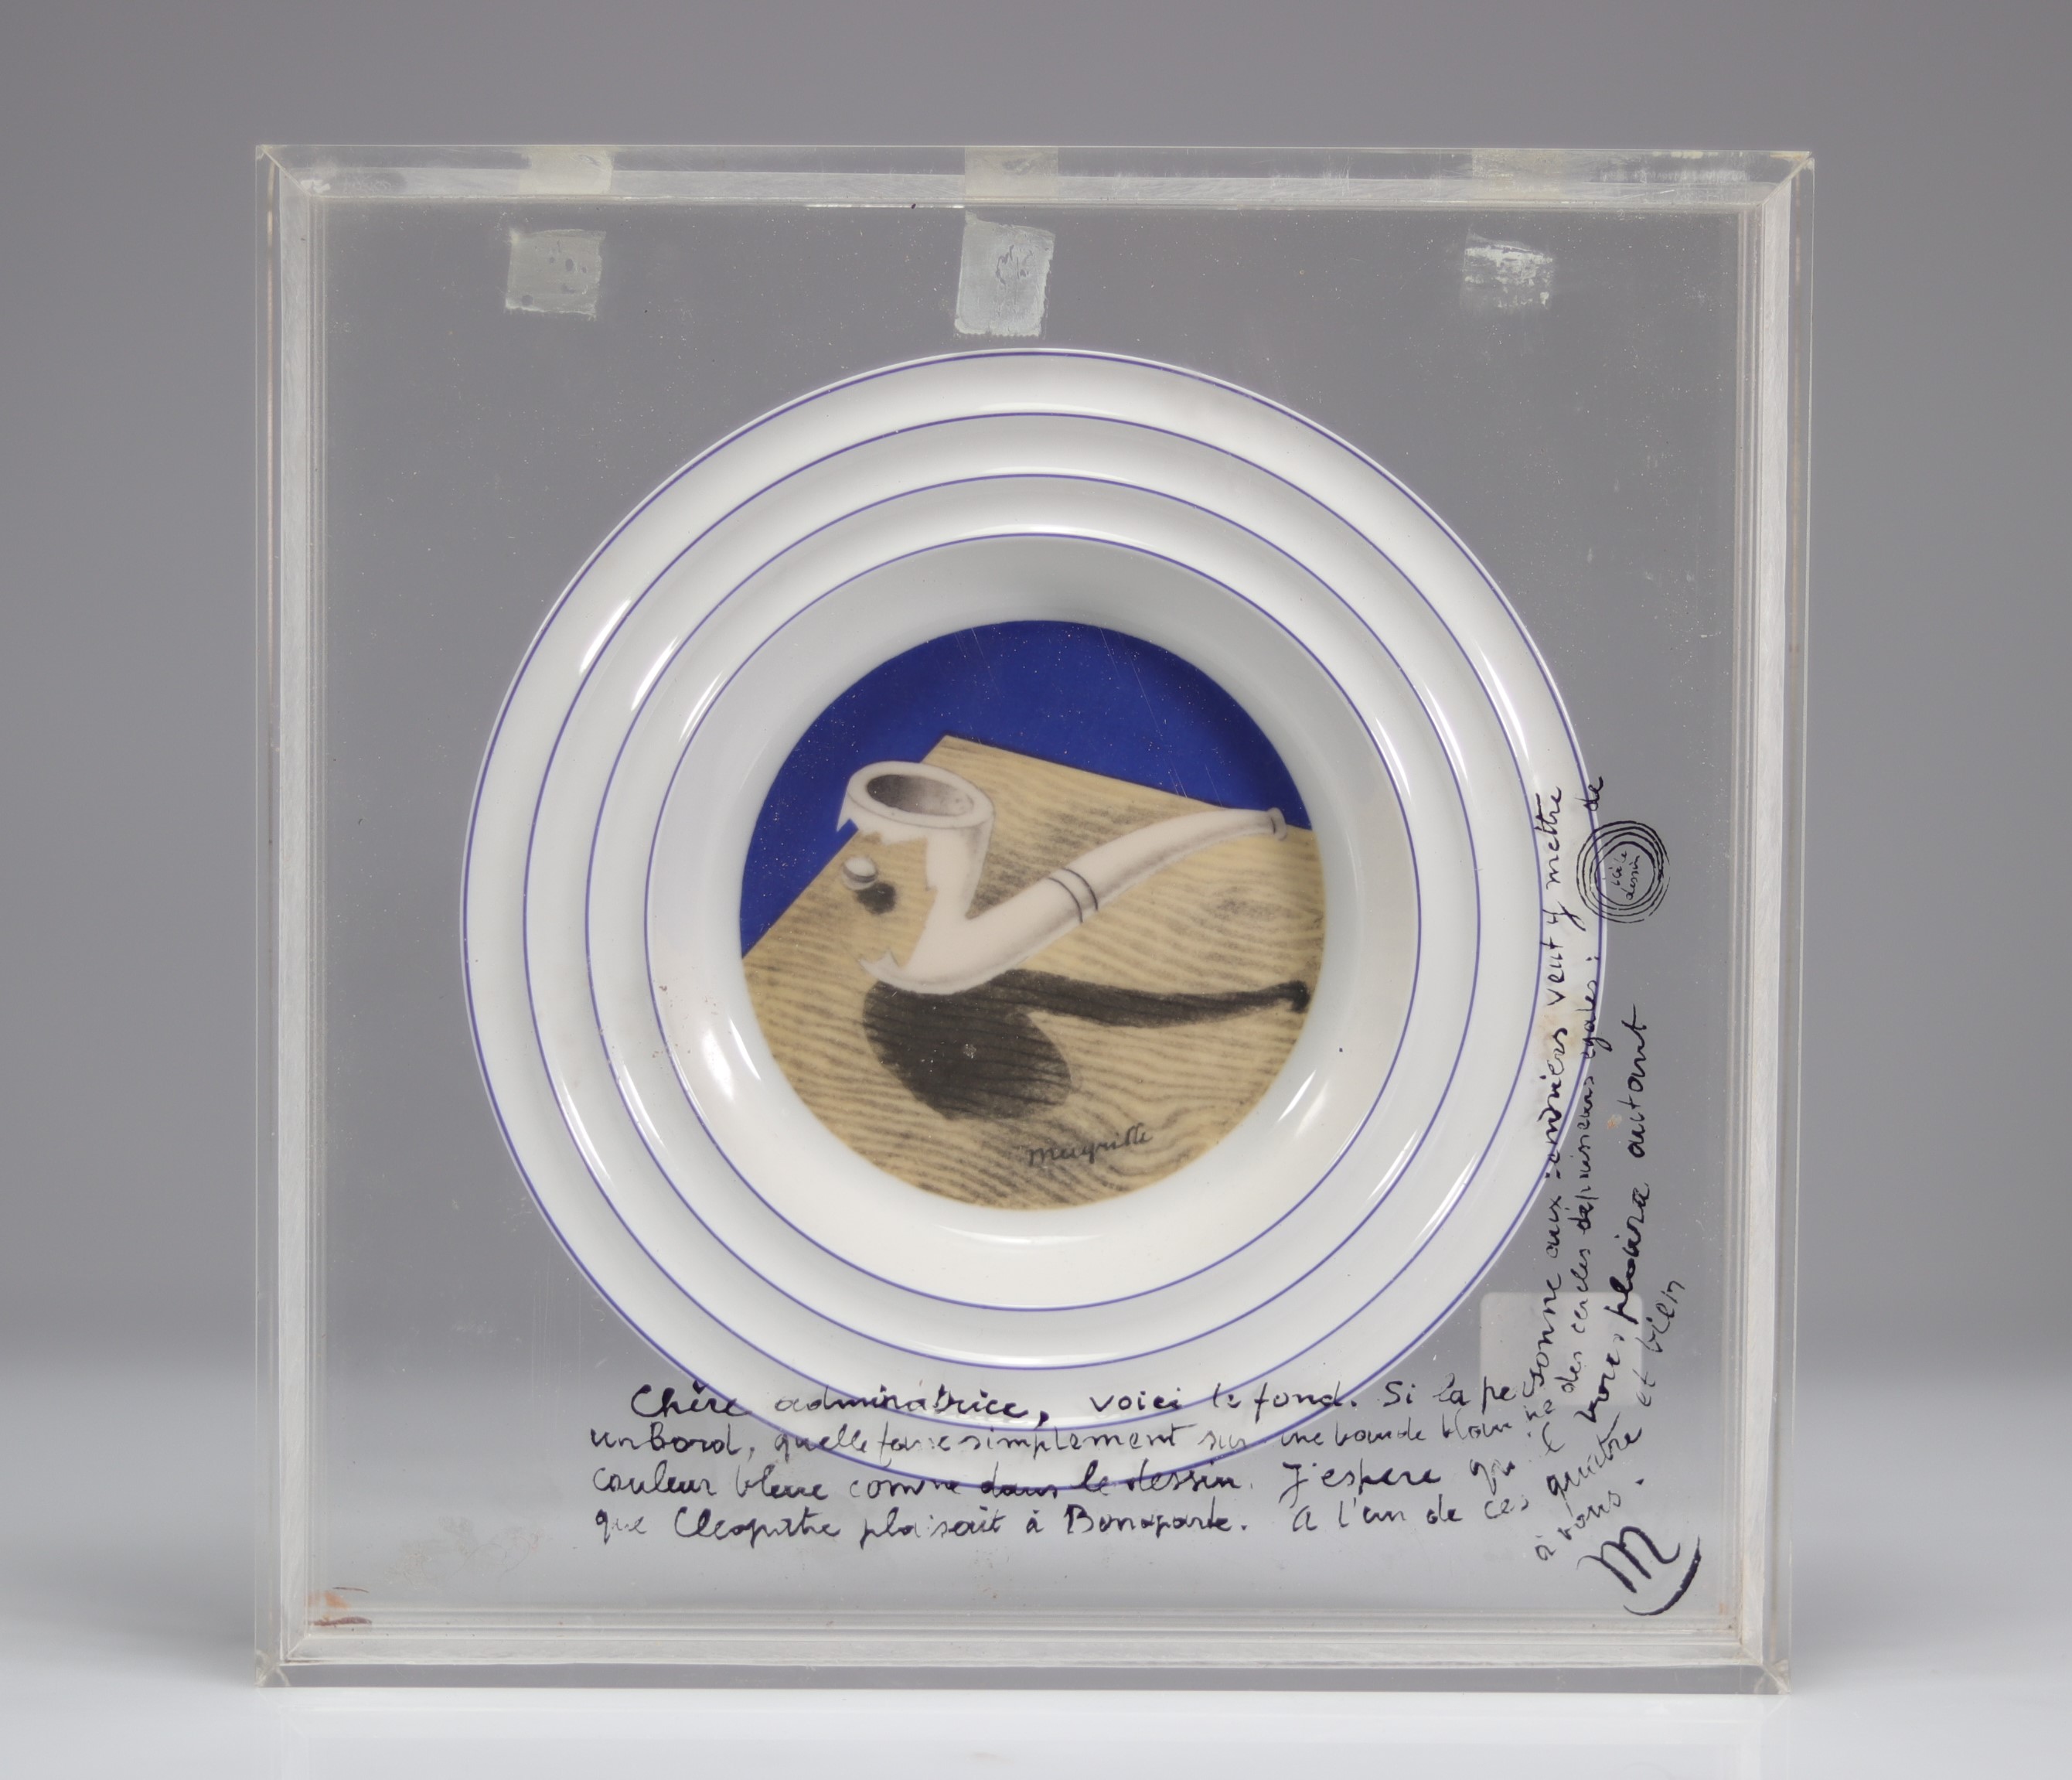 Rene Magritte. "The metamorphosis of the object". 1933. Polychrome porcelain ashtray presented in a - Image 3 of 3